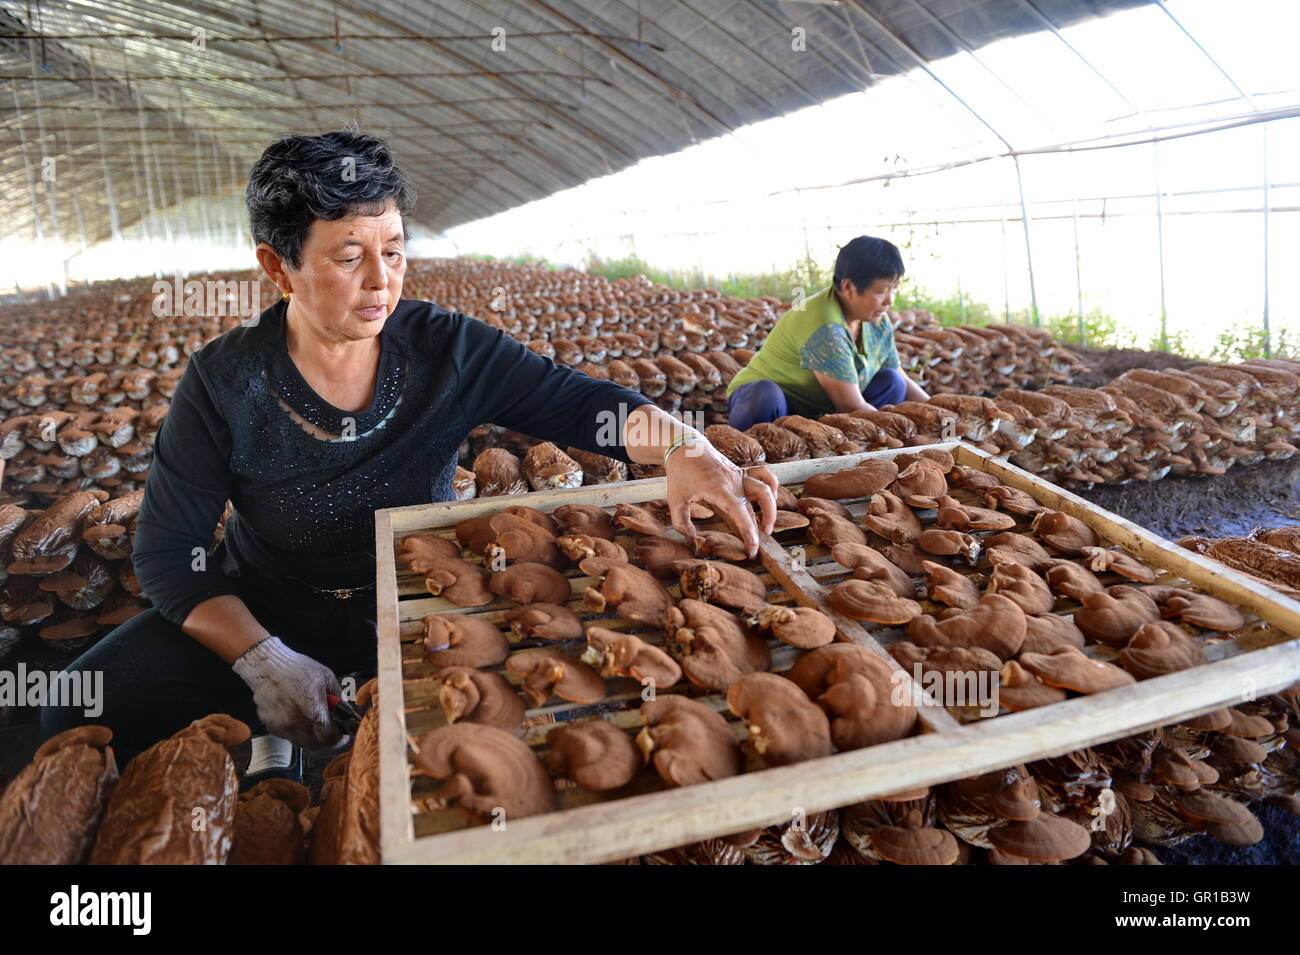 Photos Chine : champignons comestibles au Hebei — Chine Informations